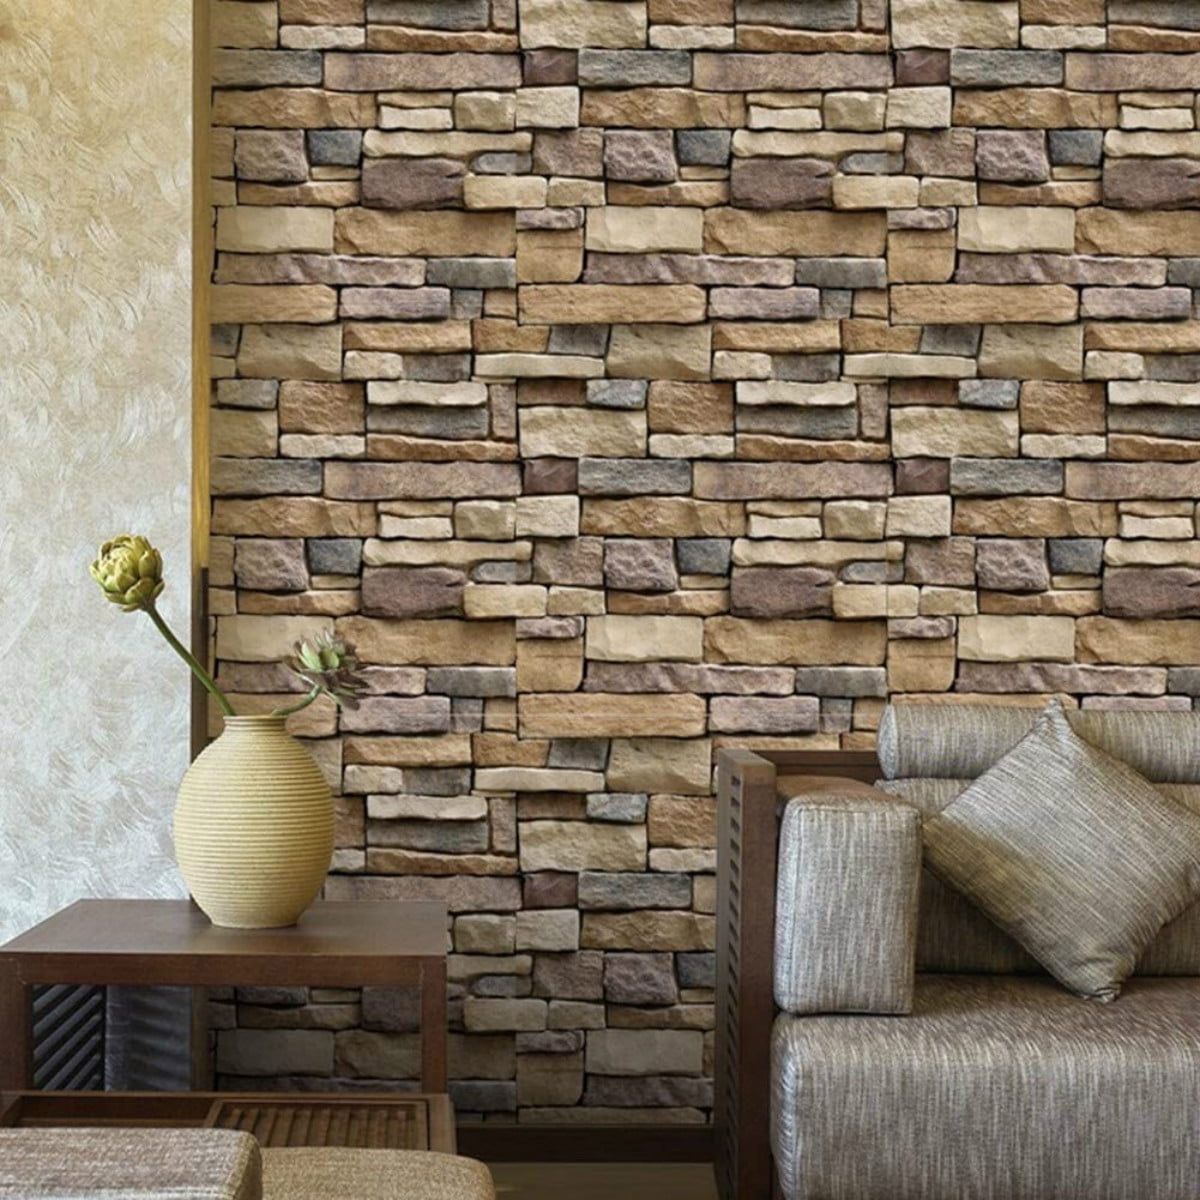 HeloHo 3D Stone Peel and Stick Wallpaper Removable Self-Adhesive Wallpaper 3D Textured Rustic Brick Wall Paper Bedroom Living Room Wall DIY Decor